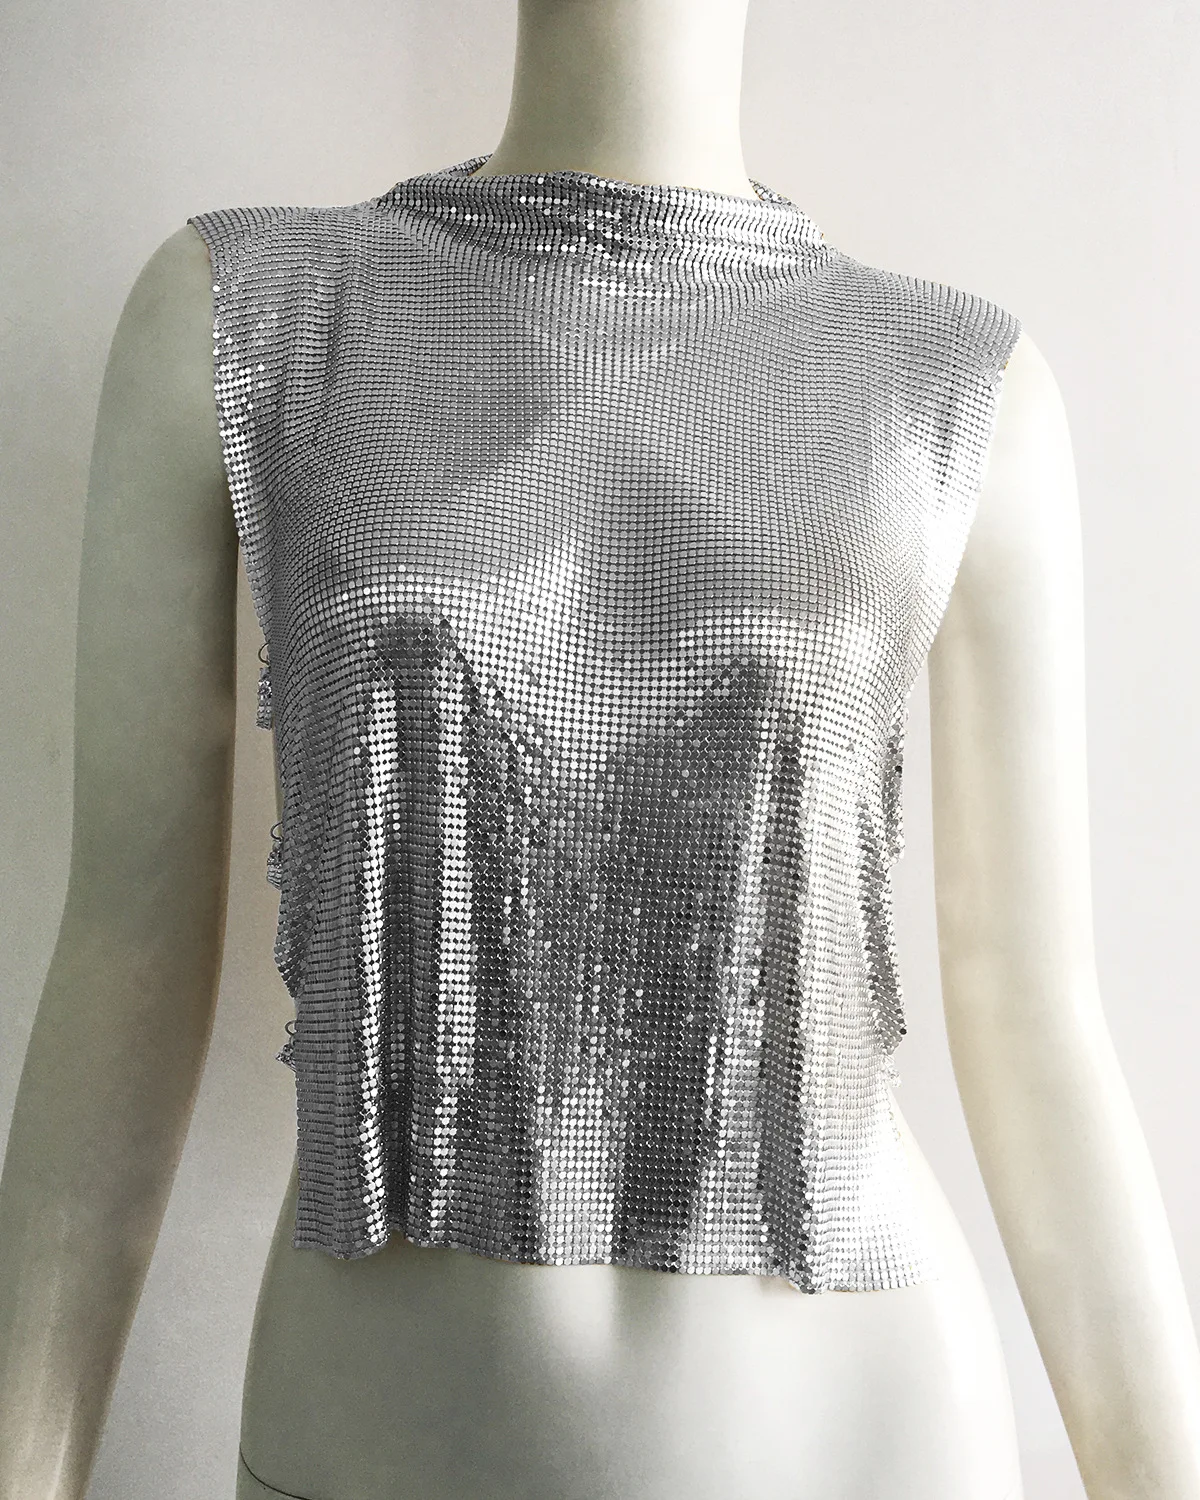 Neck Top 2023 New Shiny Party Chainmail Metal Mesh Sequins Top Summer ...